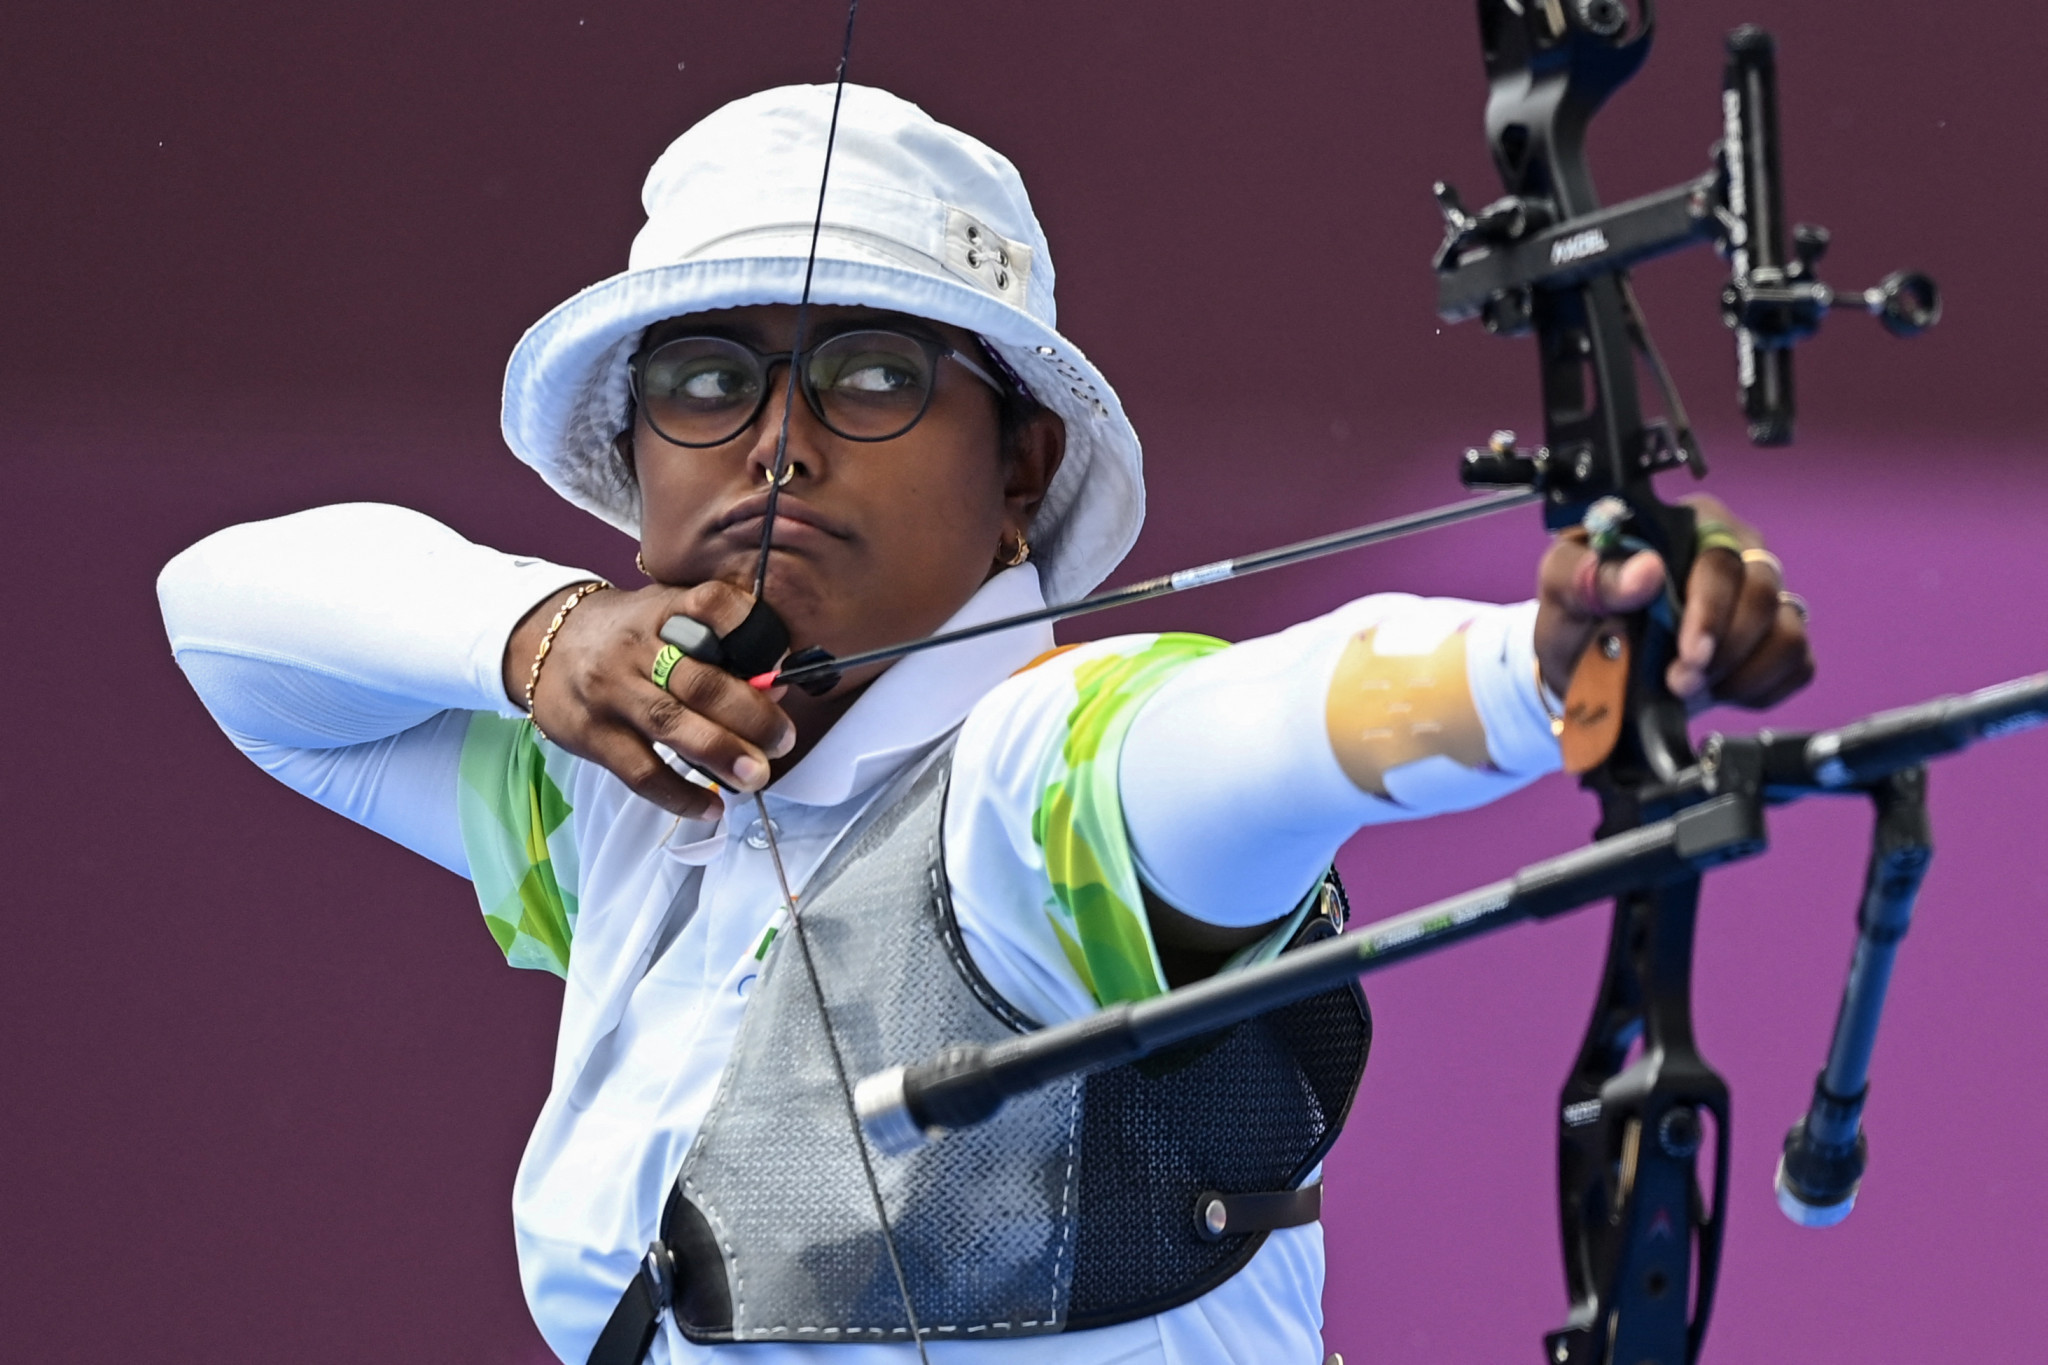 India's Kumari returns for third stage of Archery World Cup in Paris